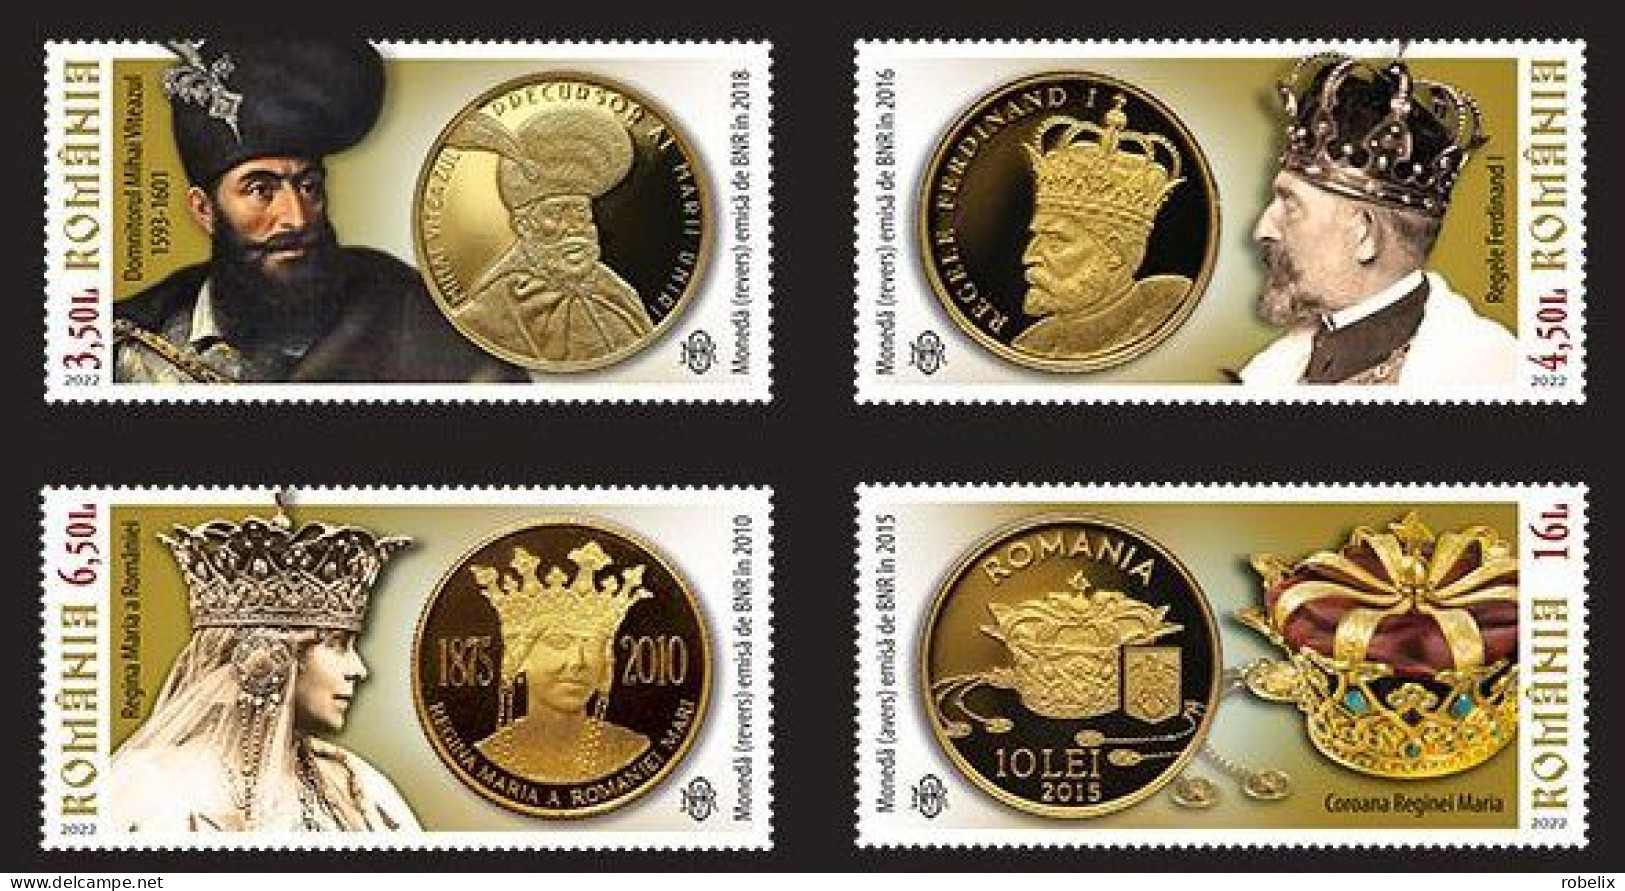 ROMANIA 2022  THE GREAT UNION IN NUMISMATICS - Gold Coins, Kings  - Set Of 4 Stamps   MNH** - Münzen